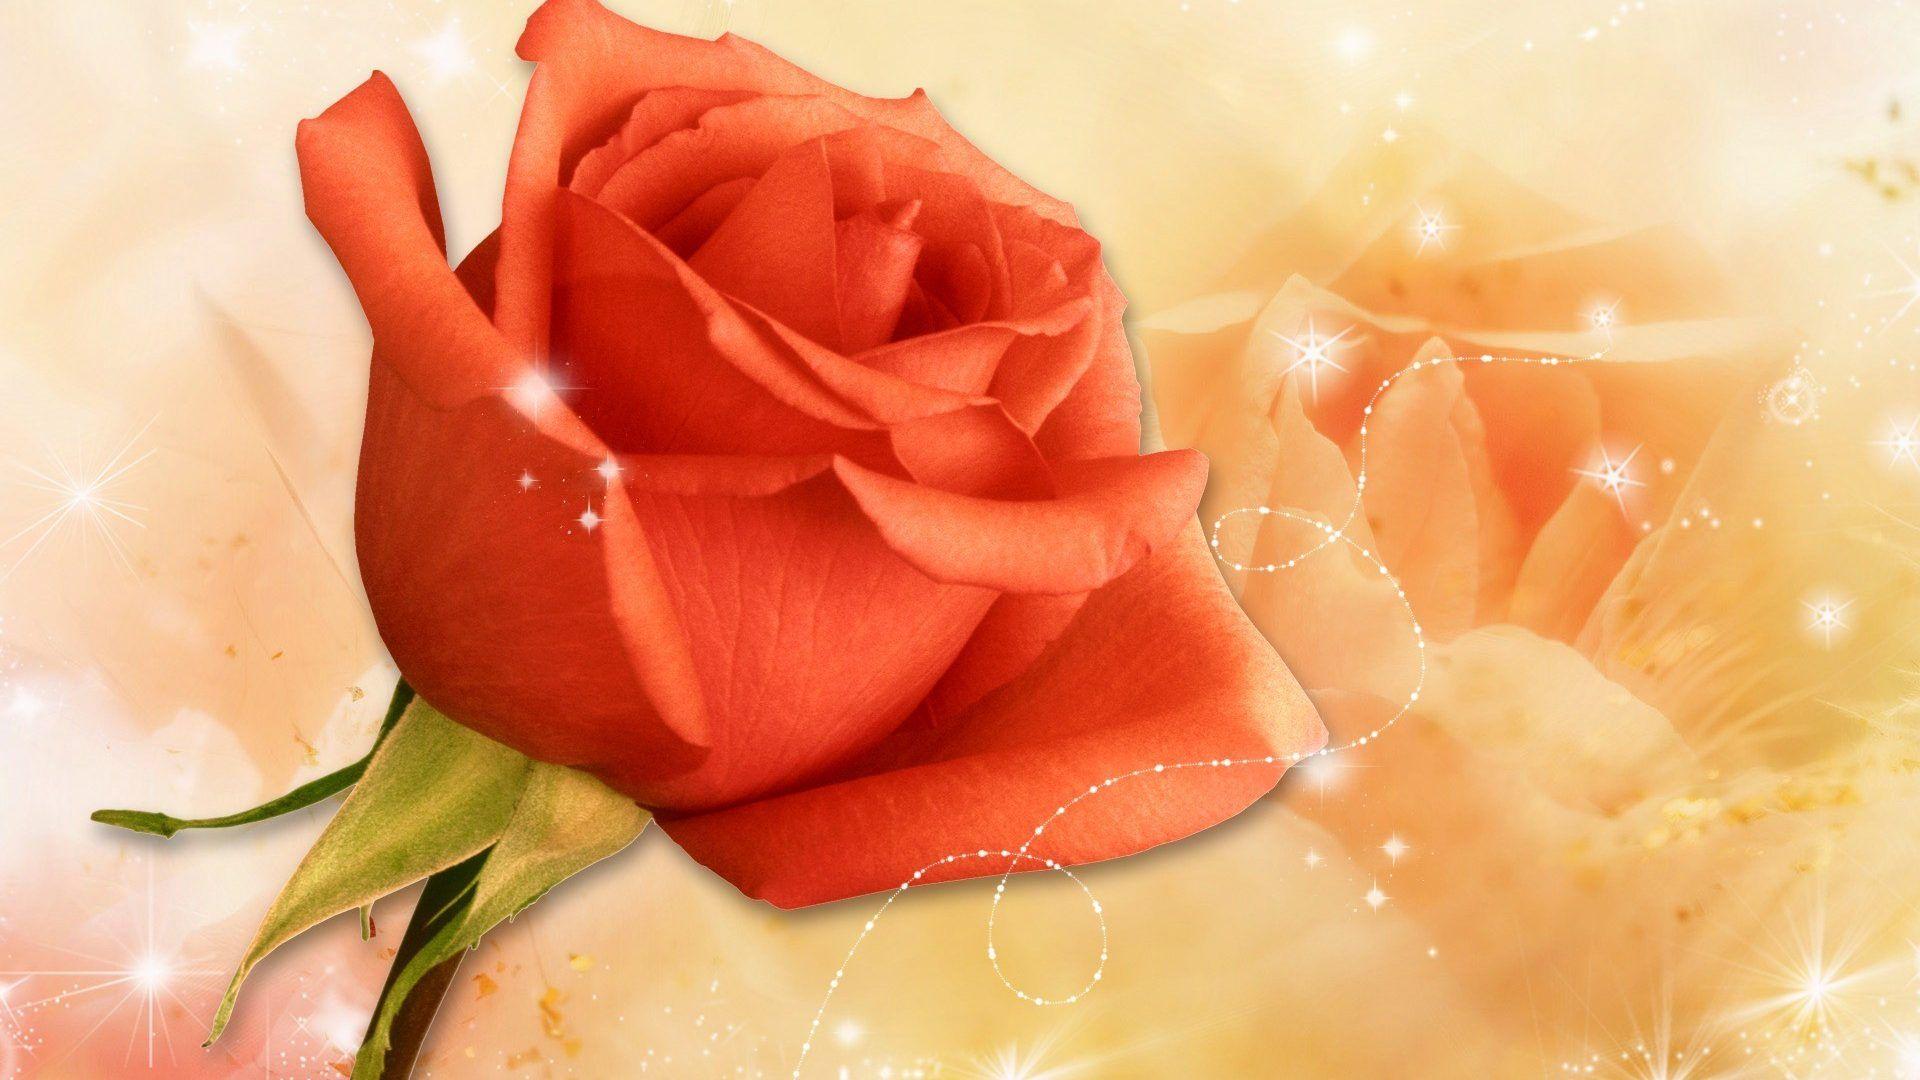 Flowers wallpaper: Coffee Time Roses Flowers Red Spring